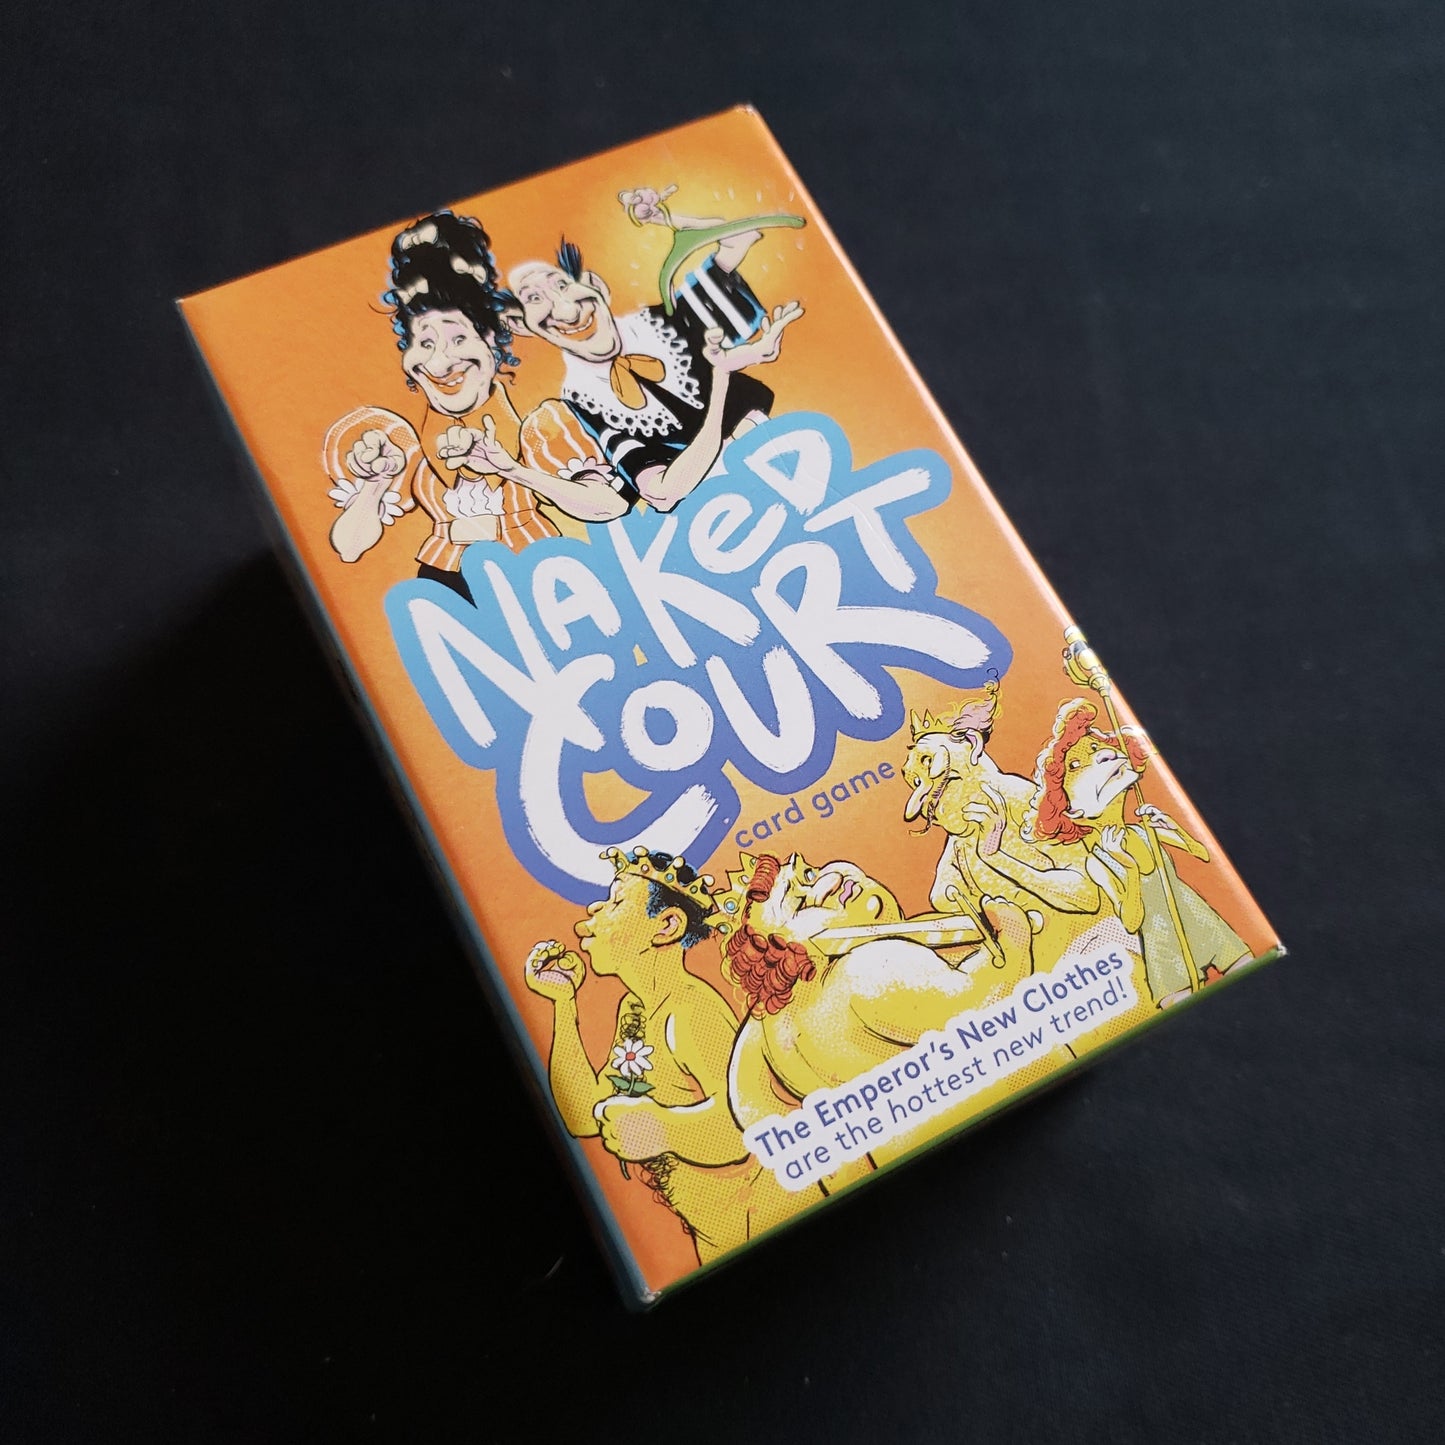 Image shows the front cover of the box of the Naked Court card game